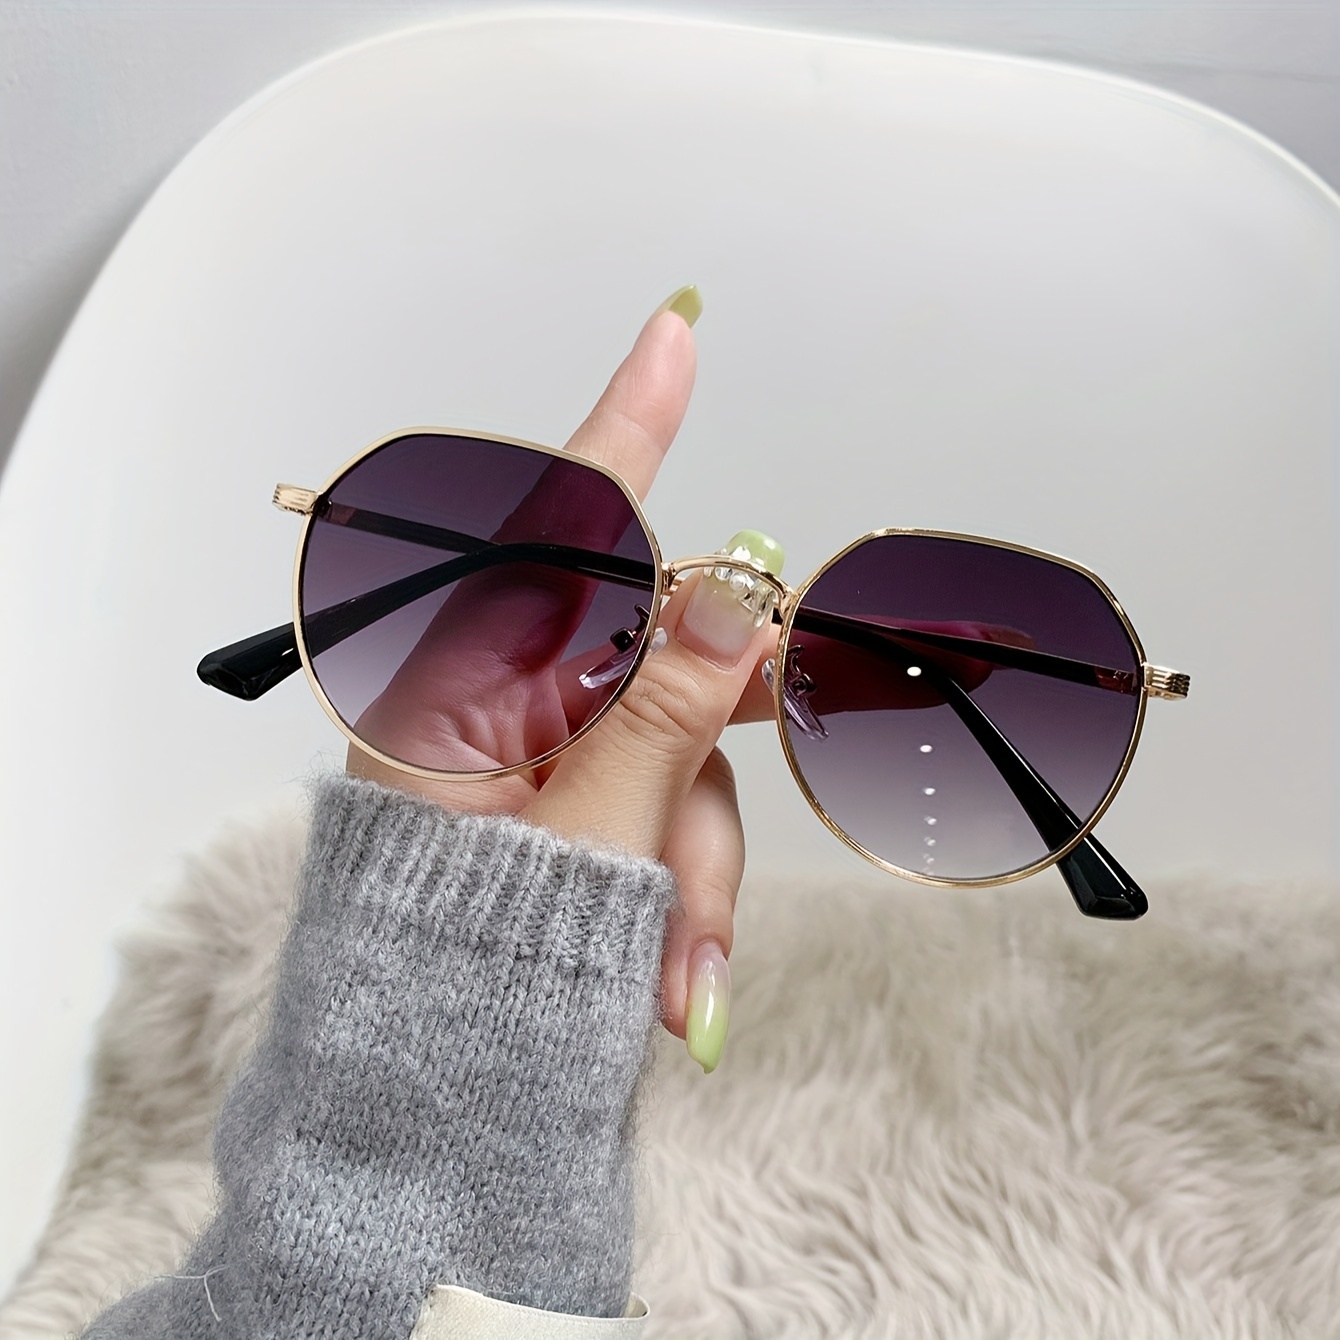 

Oval Metal Frame Fashion Glasses For Women Casual Gradient Fashion Anti Glare Sun Shades For Vacation Beach Party